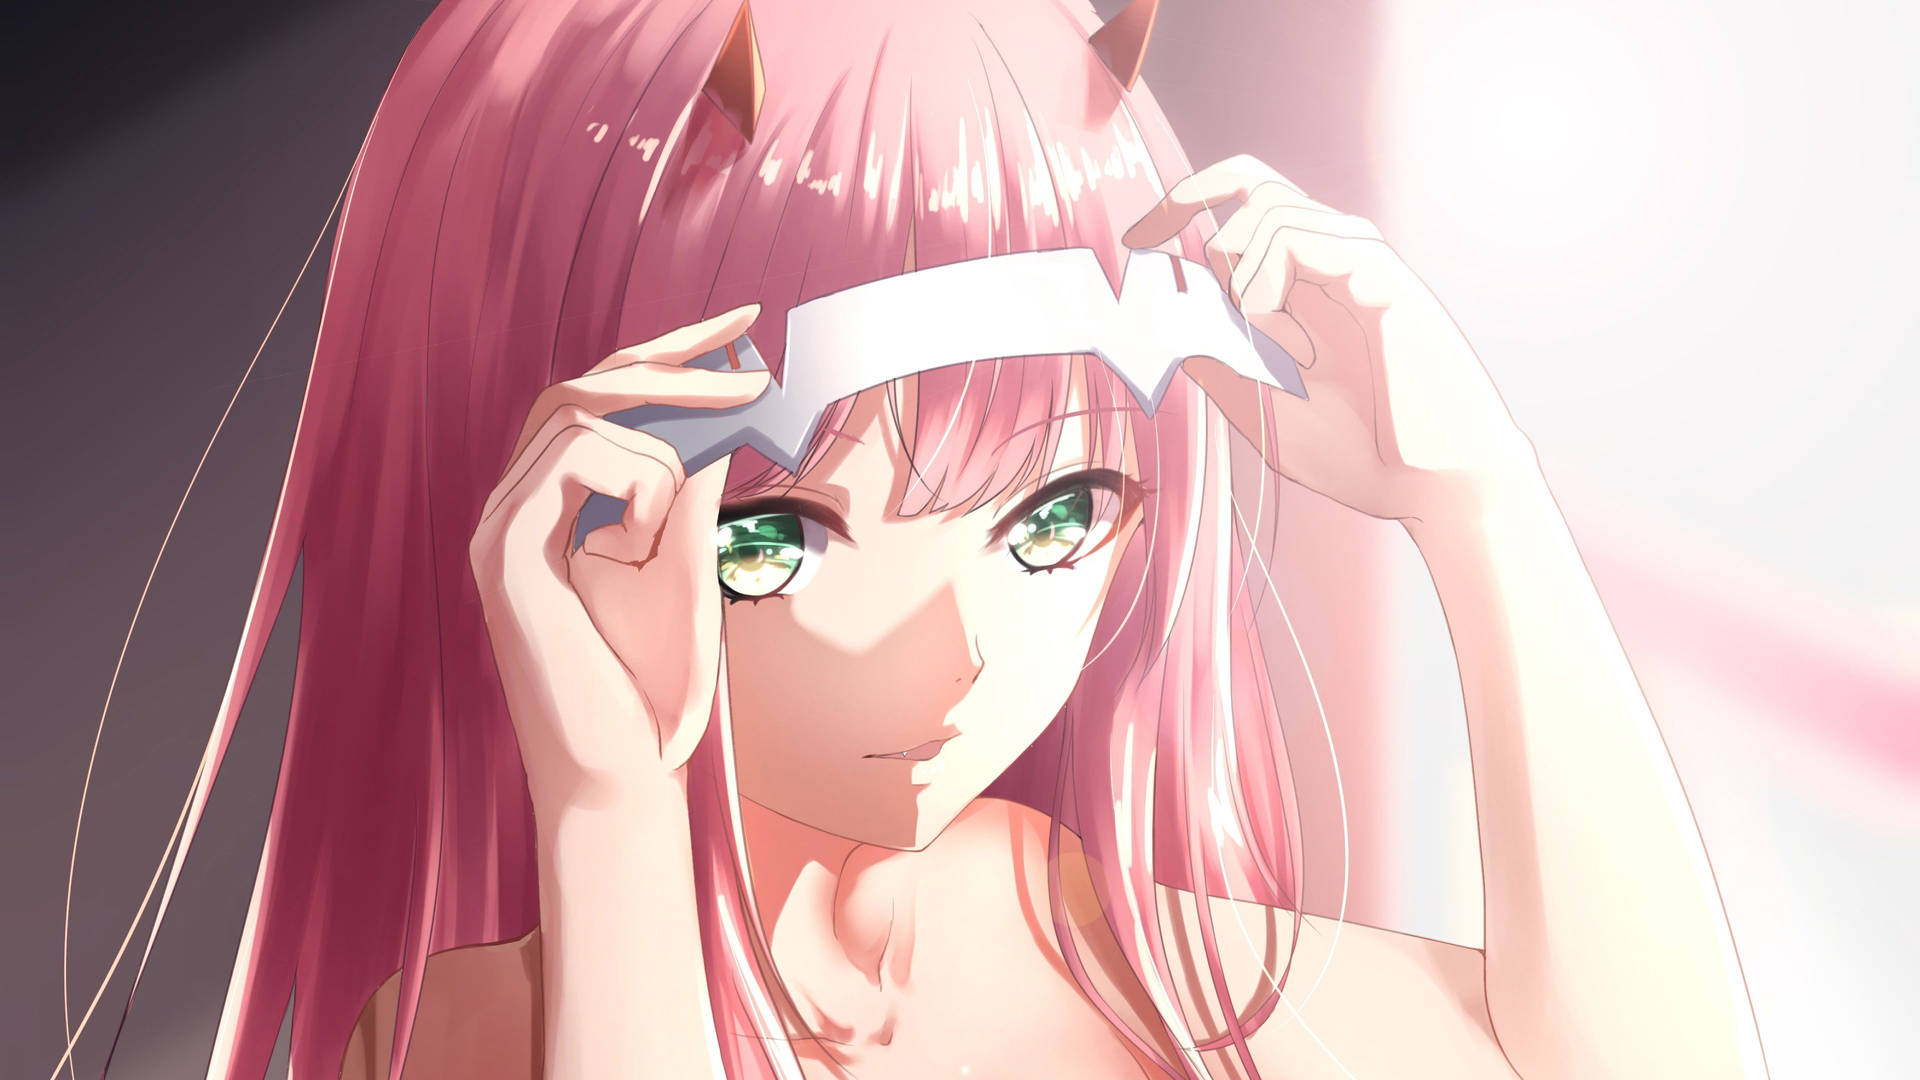 Zero Two patiently fixes her headband on a bright morning Wallpaper